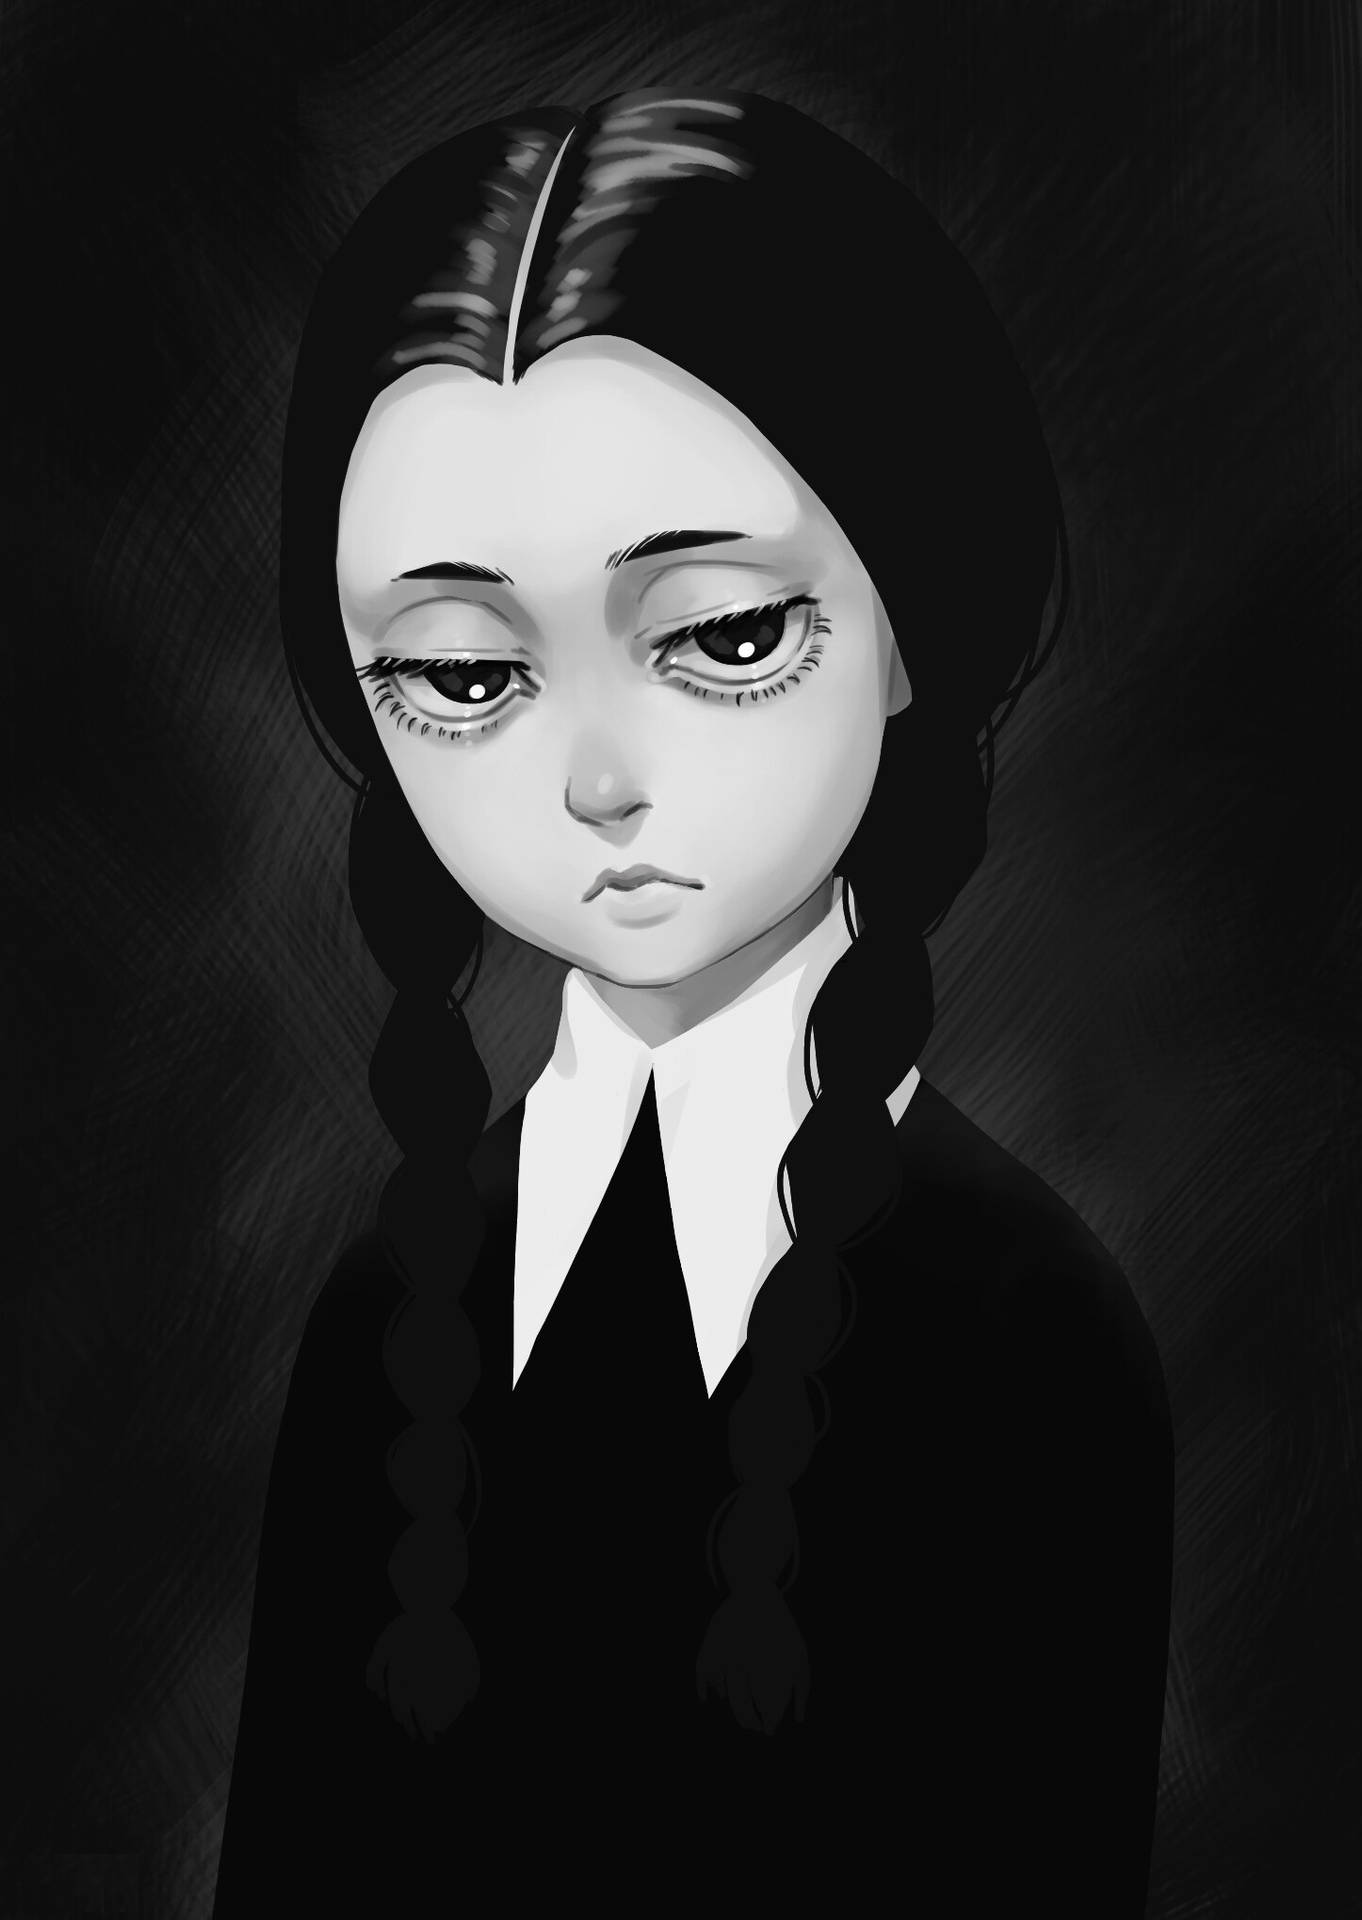 Wednesday Addams In The Addams Family Wallpapers